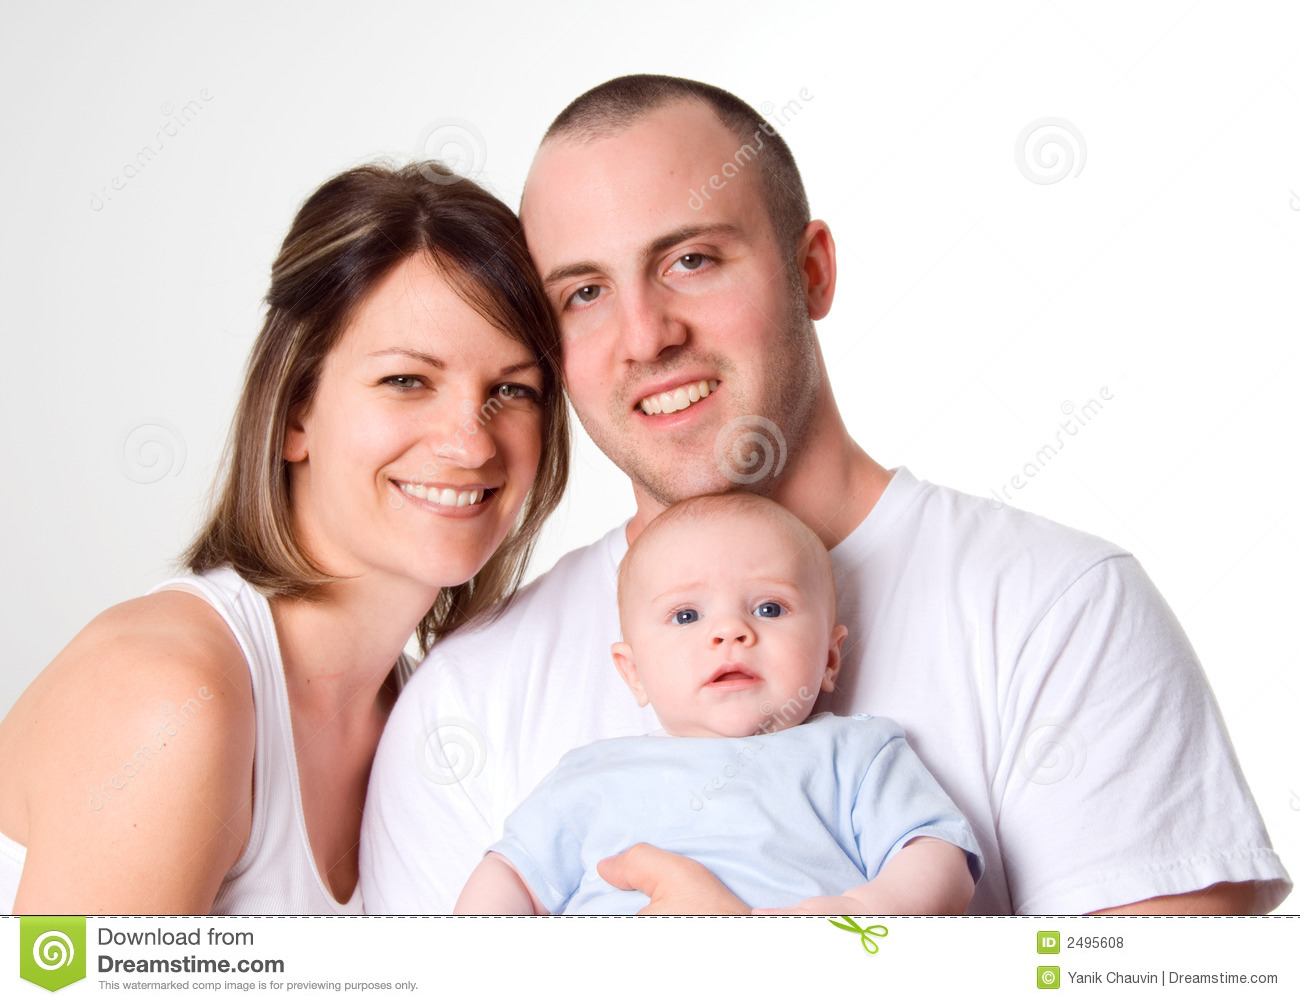 Royalty Free Stock Images Family